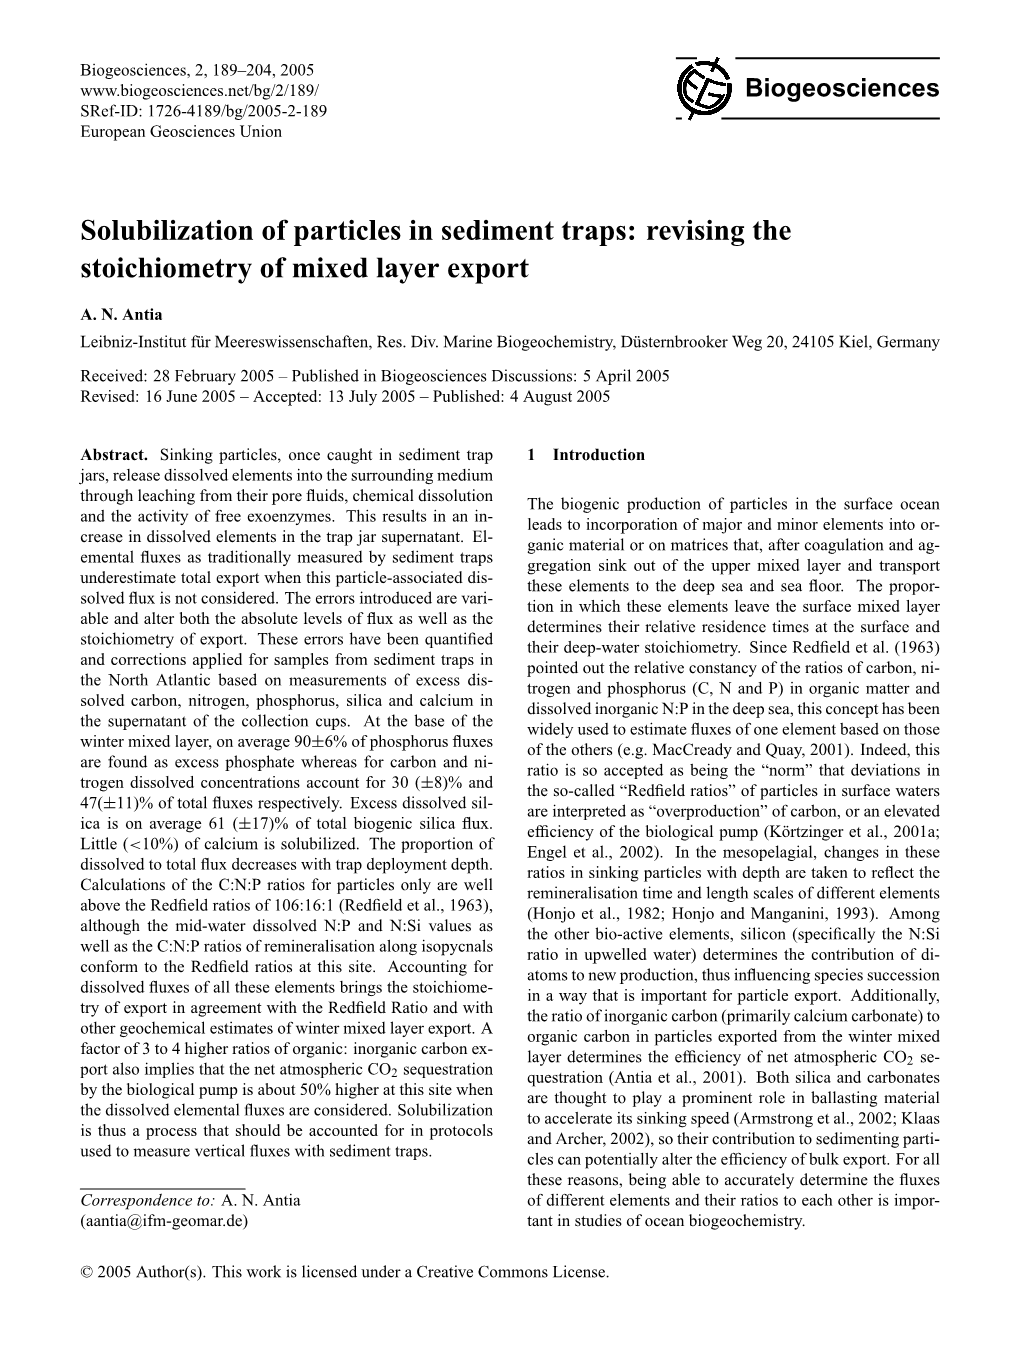 Solubilization of Particles in Sediment Traps: Revising the Stoichiometry of Mixed Layer Export